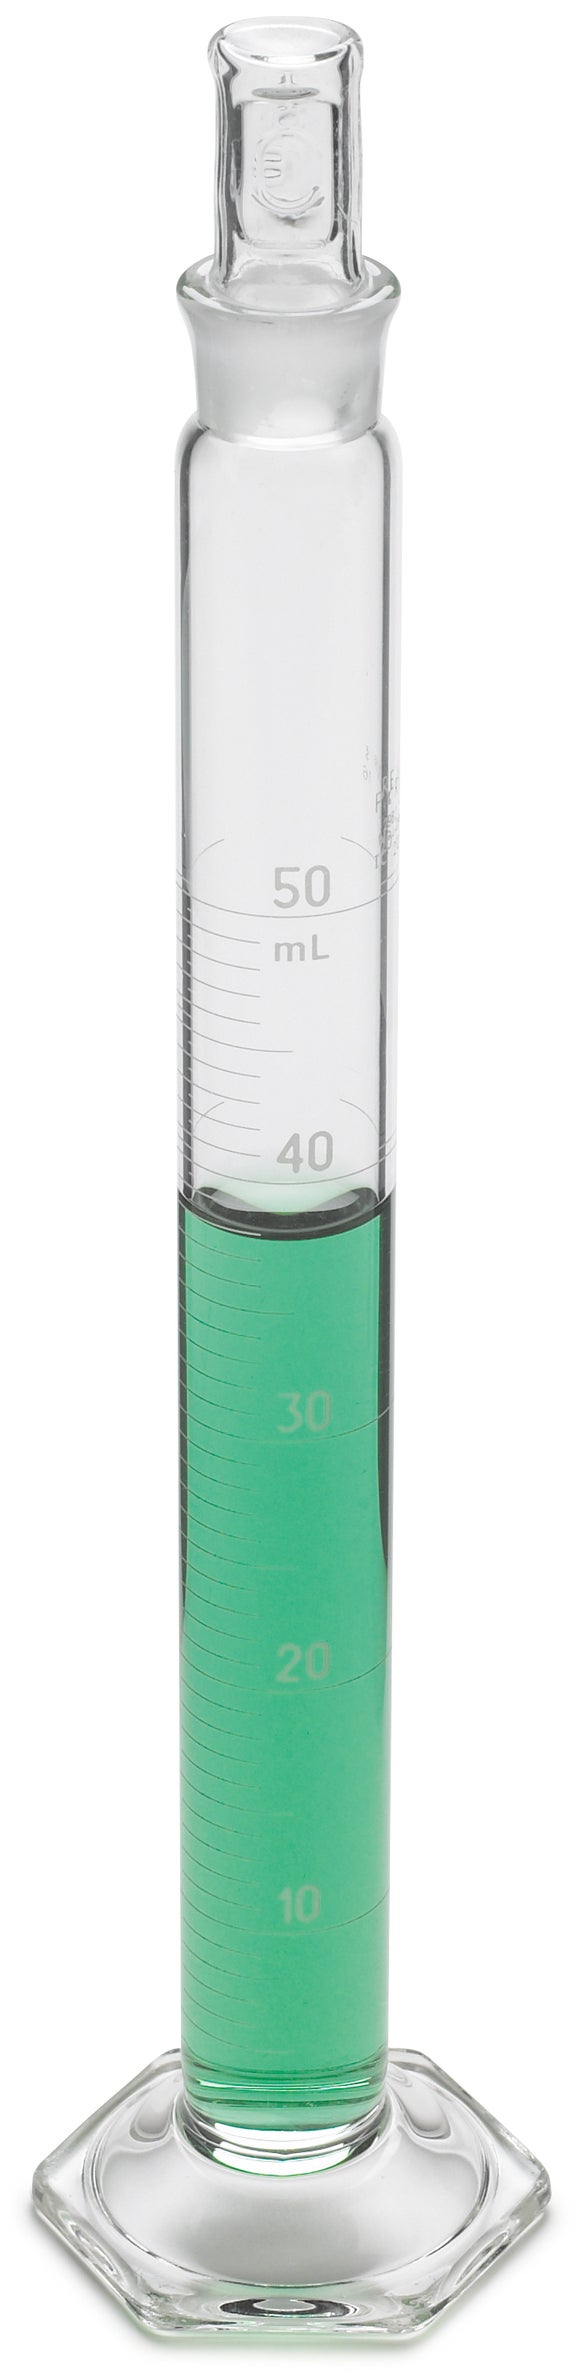 Cylinder, Graduated, Mixing, Glass, 10 mL ±0.1 mL, 0.2 mL divisions, glass stopper #13